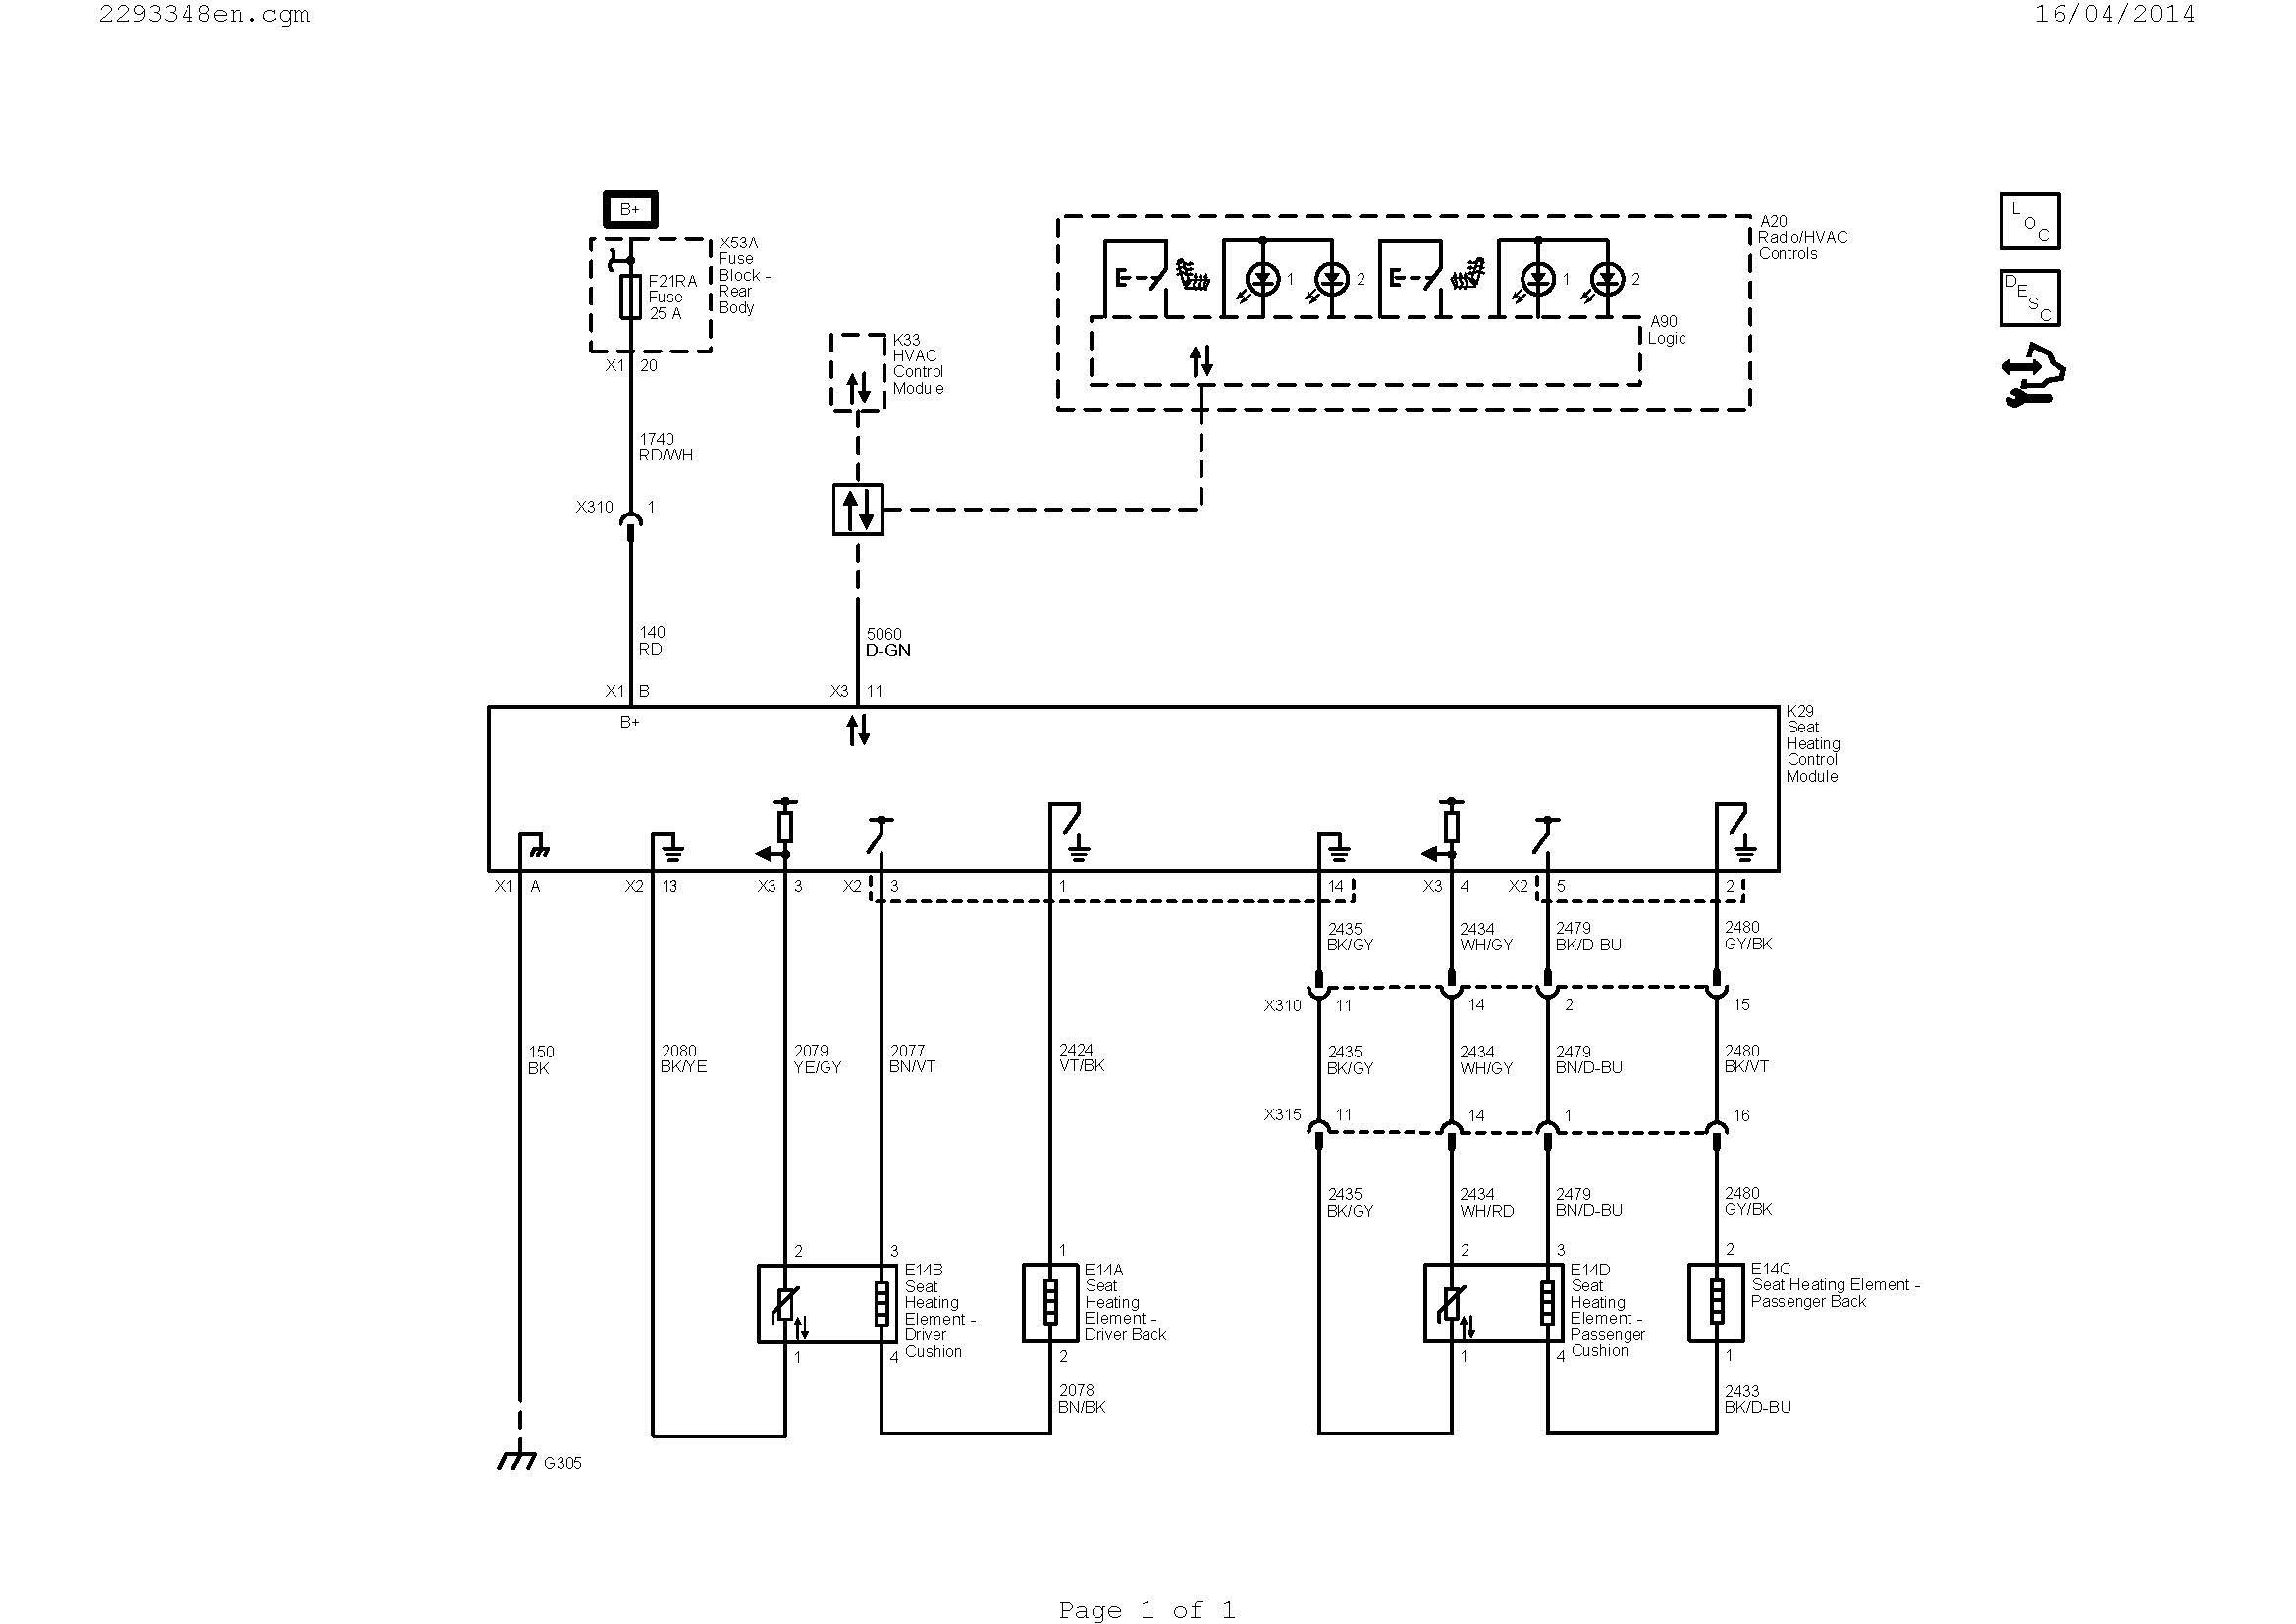 Dryer Wiring Diagram Best Electrical Wiring Diagram Collection